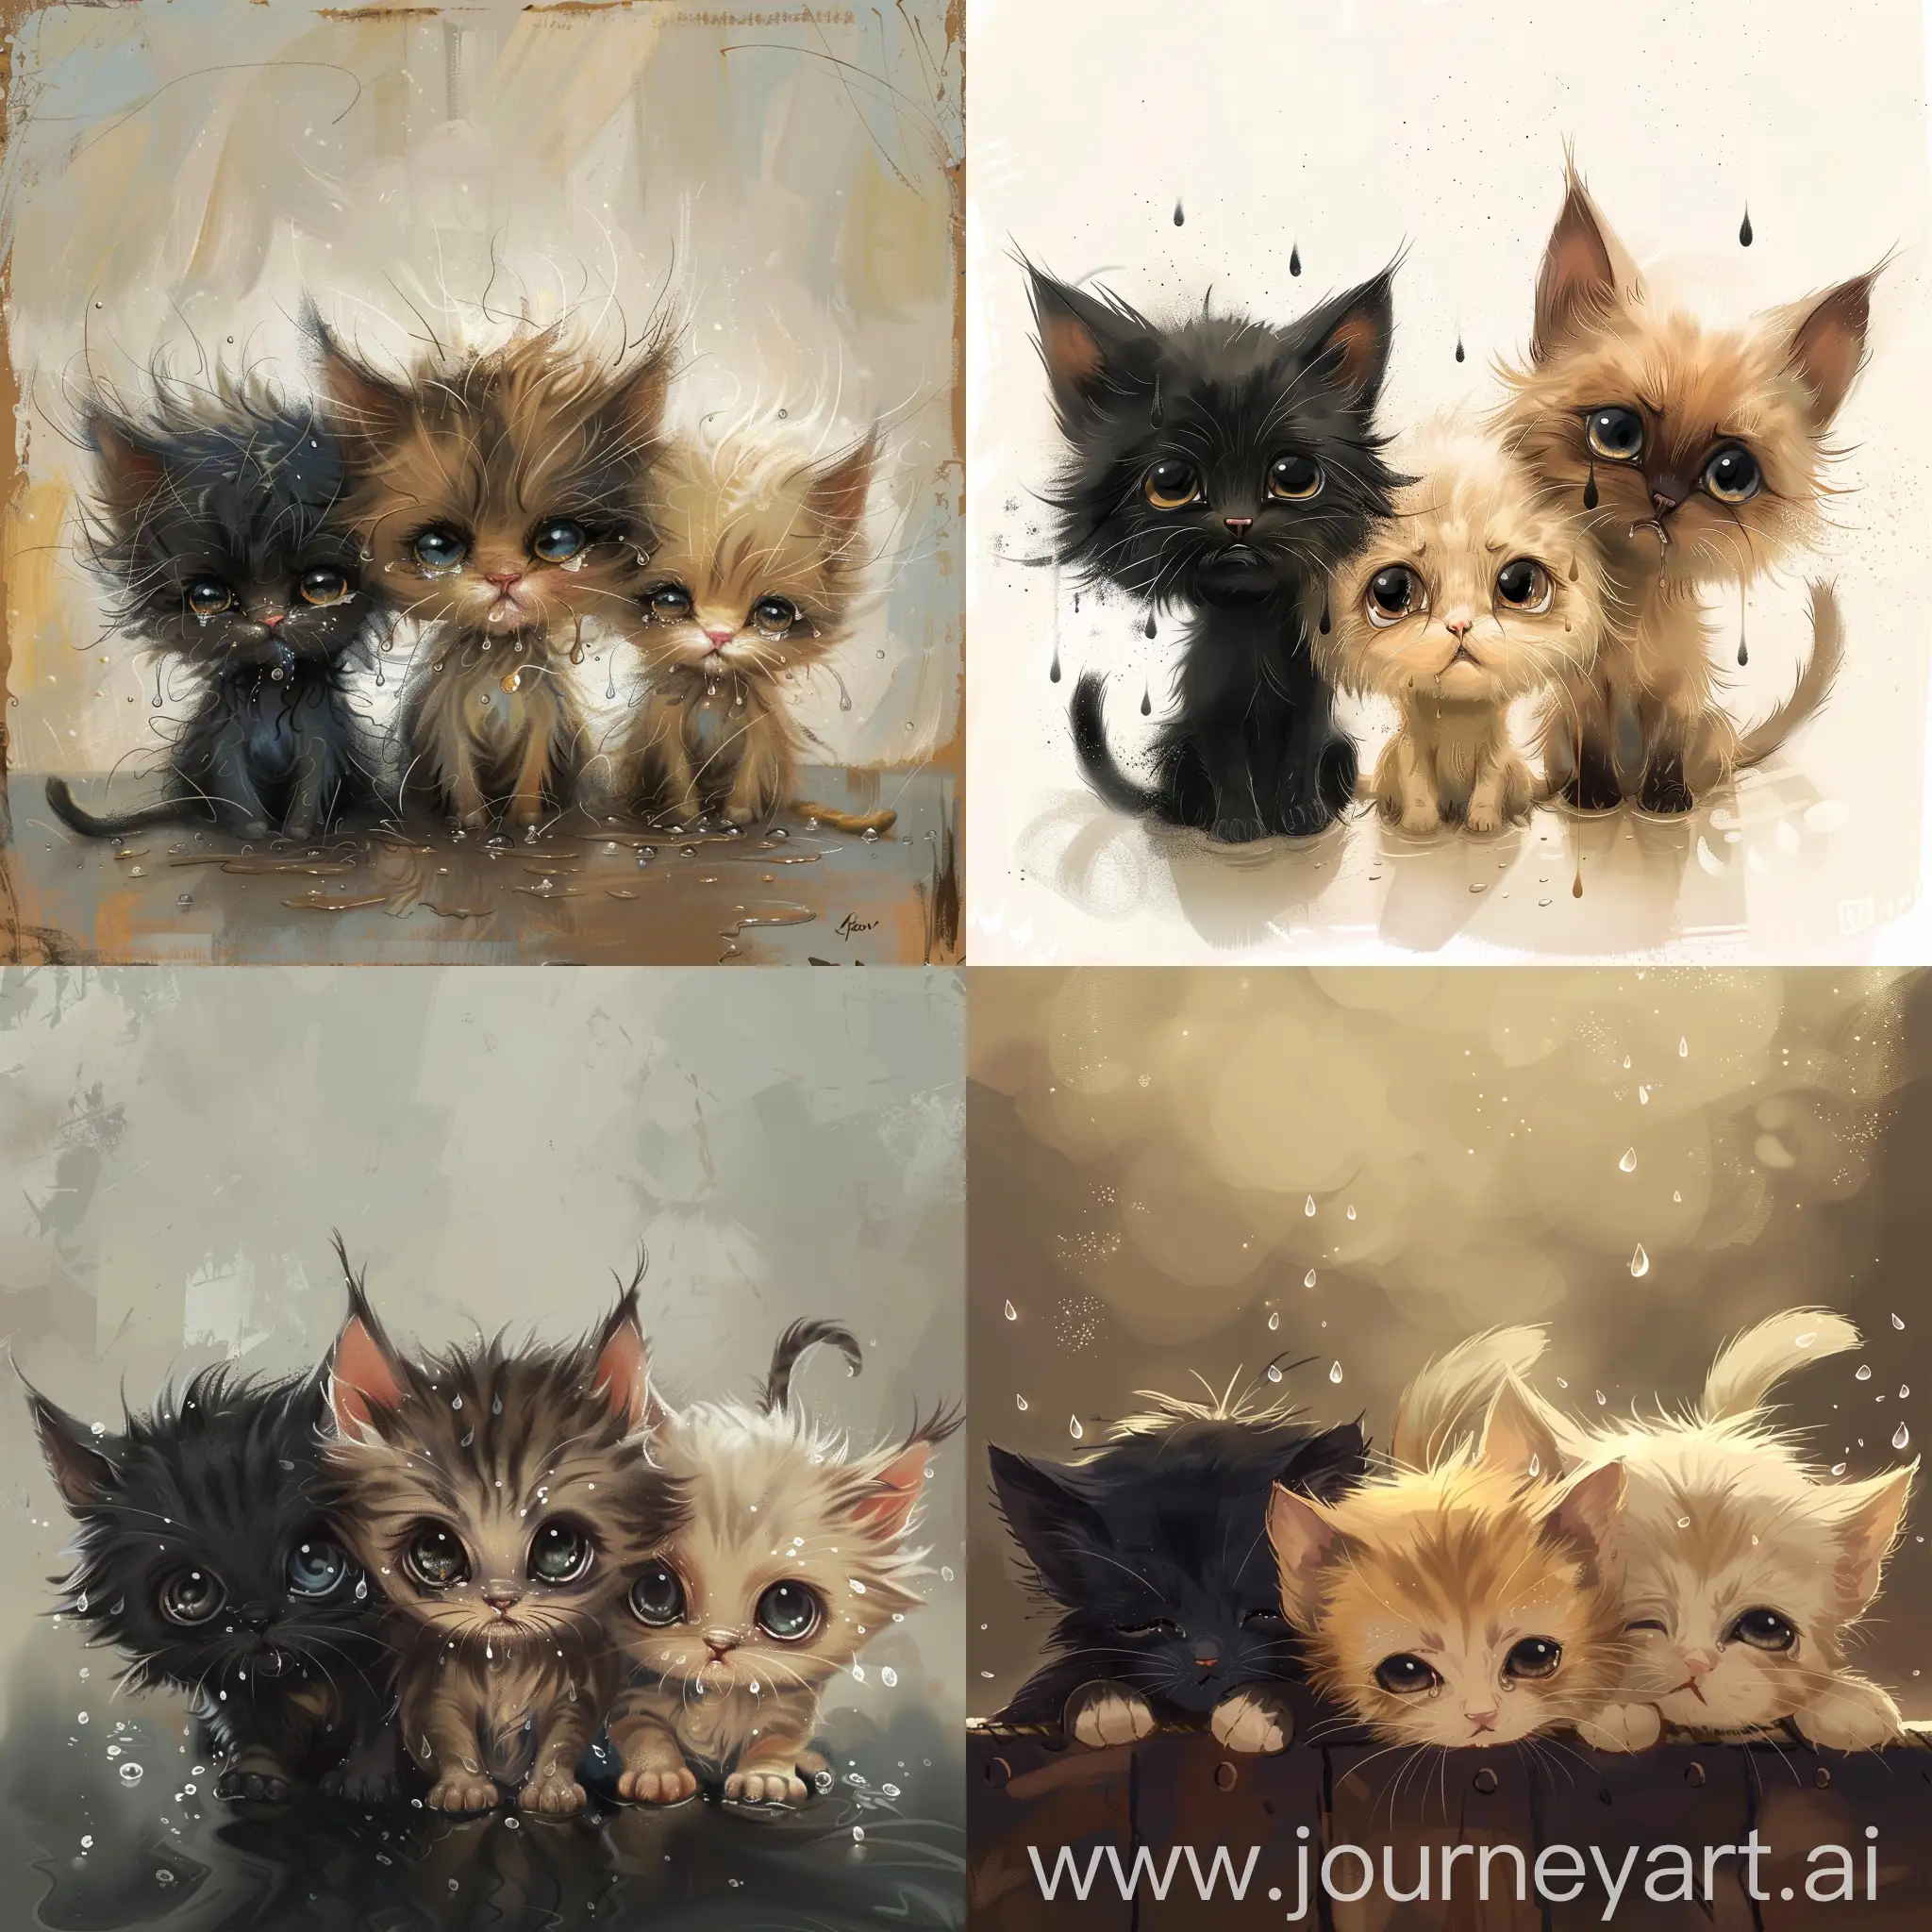 Three-Distressed-Kittens-Black-Brown-and-Blond-Hair